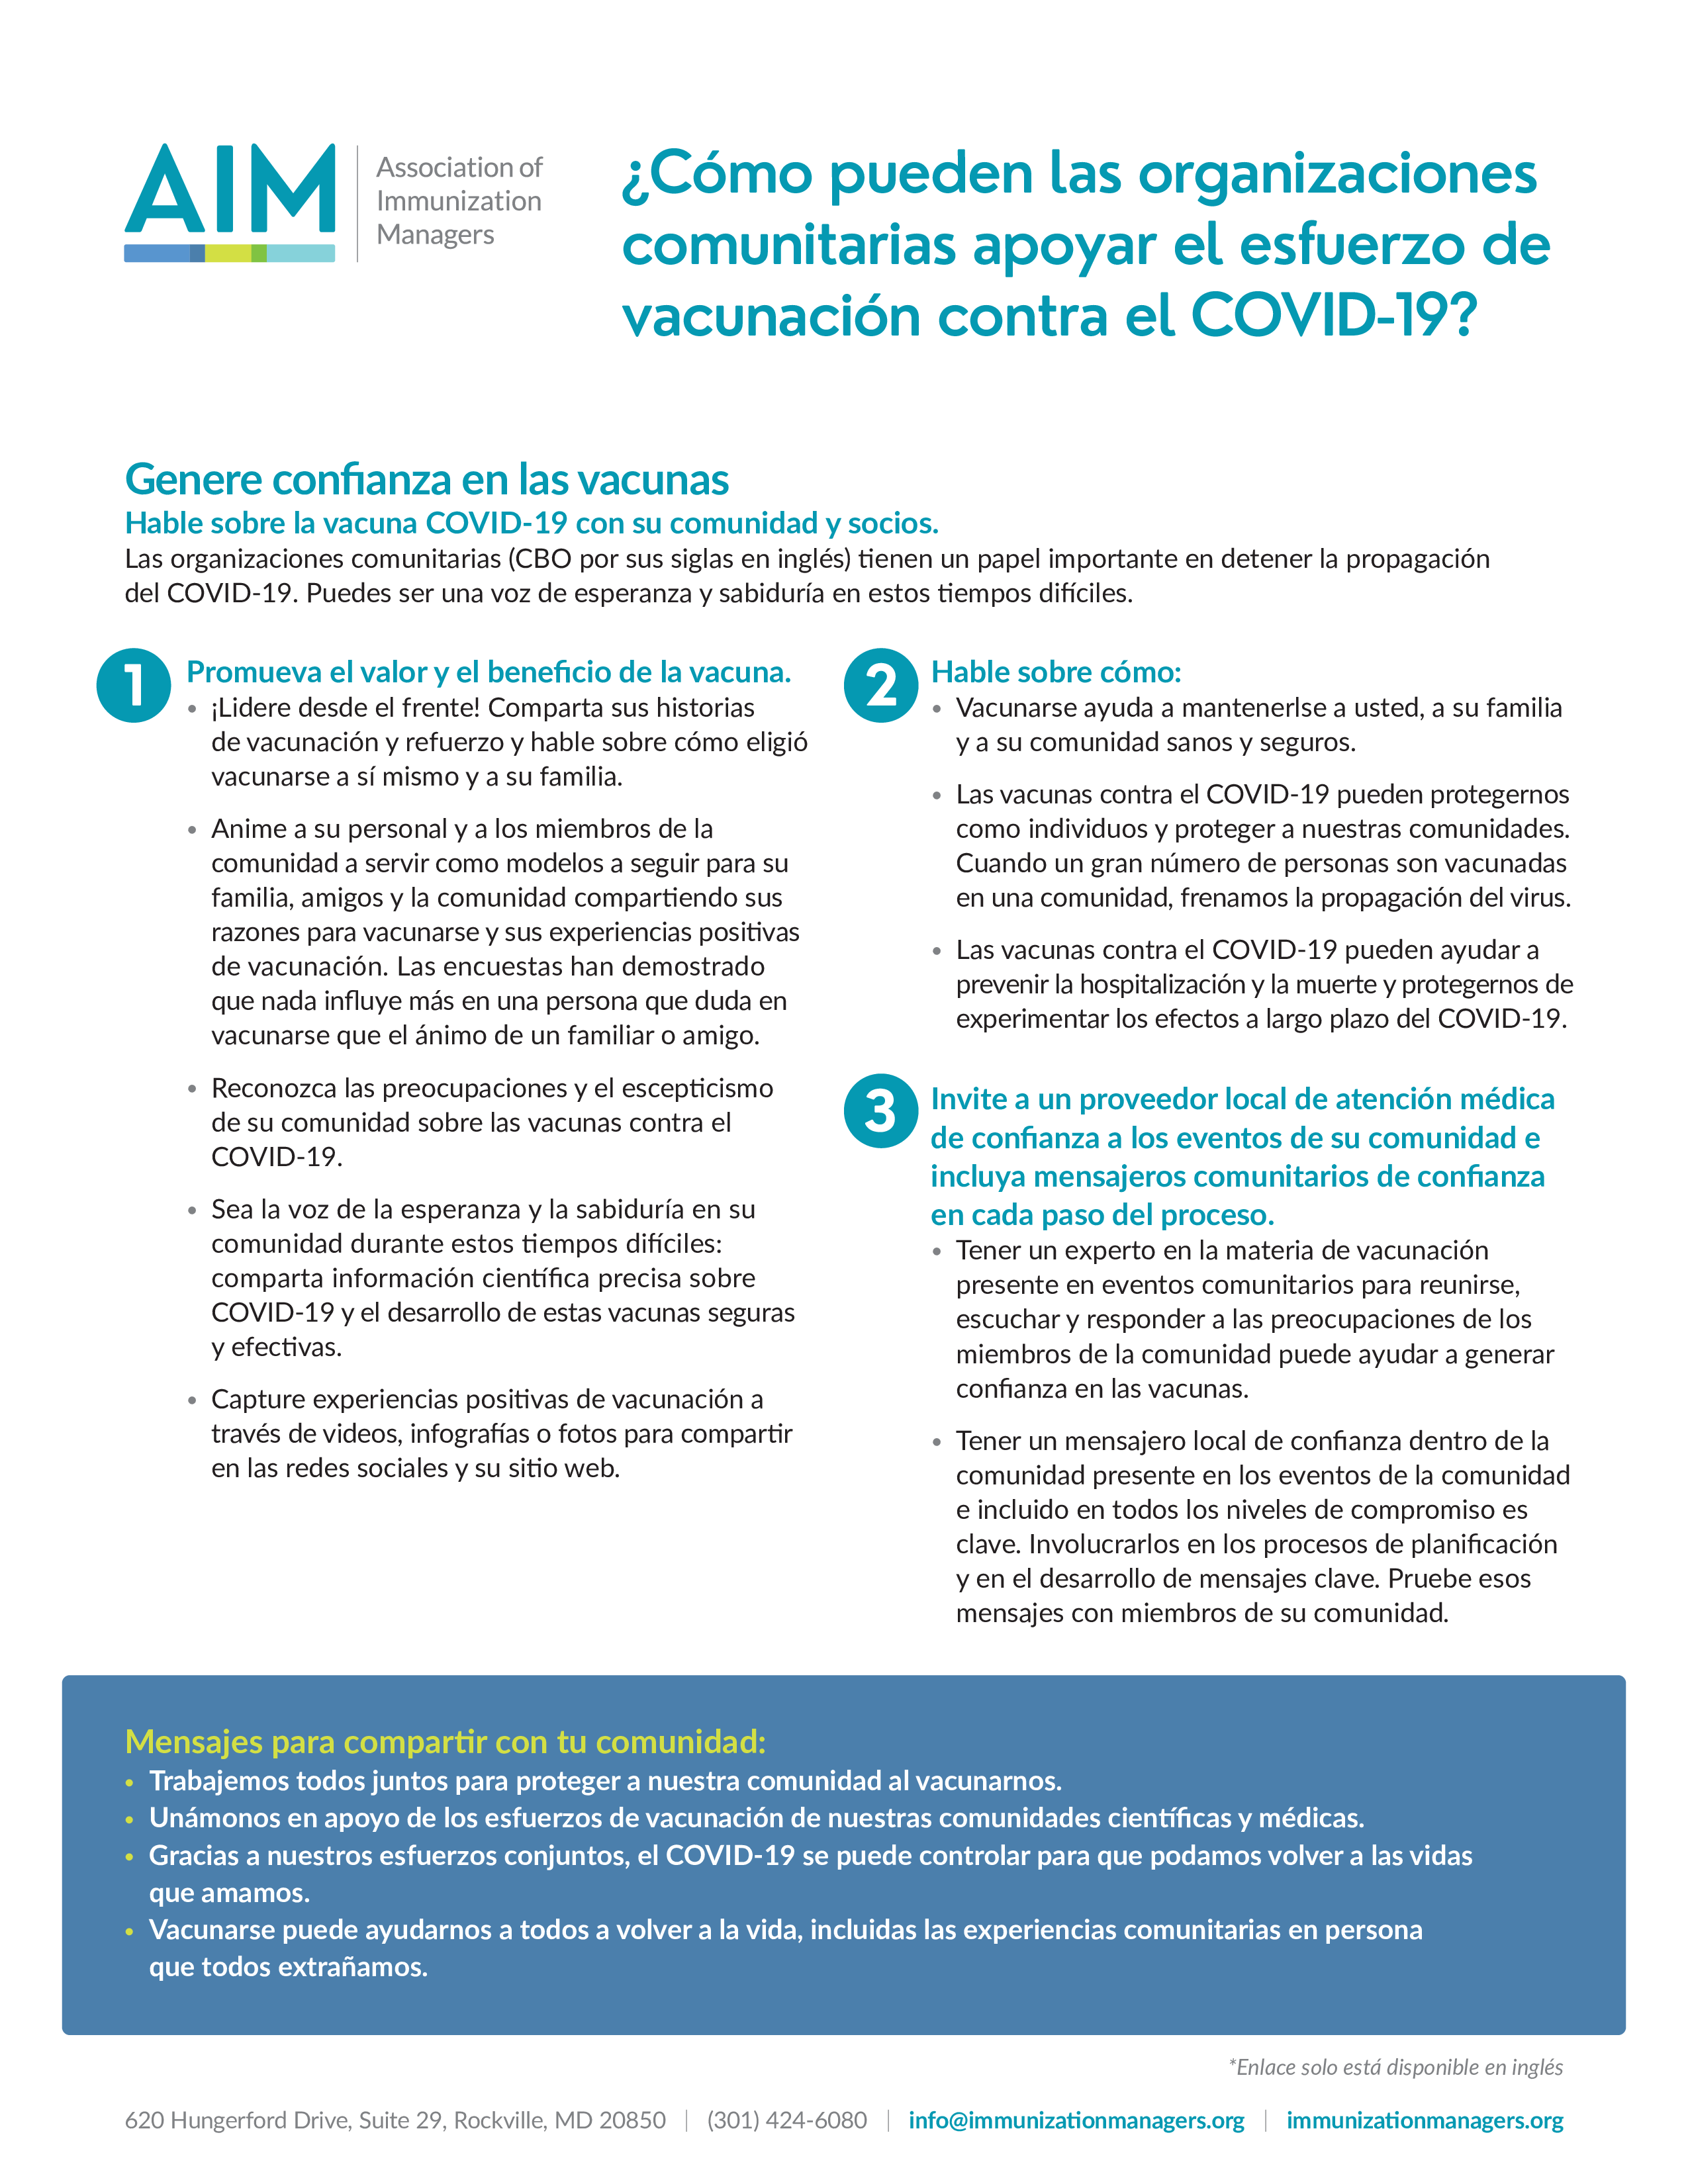 Image of factsheet from Association of Immunization Managers (AIM) of tips on how CBO's can support the COVID-19 vaccination effort.